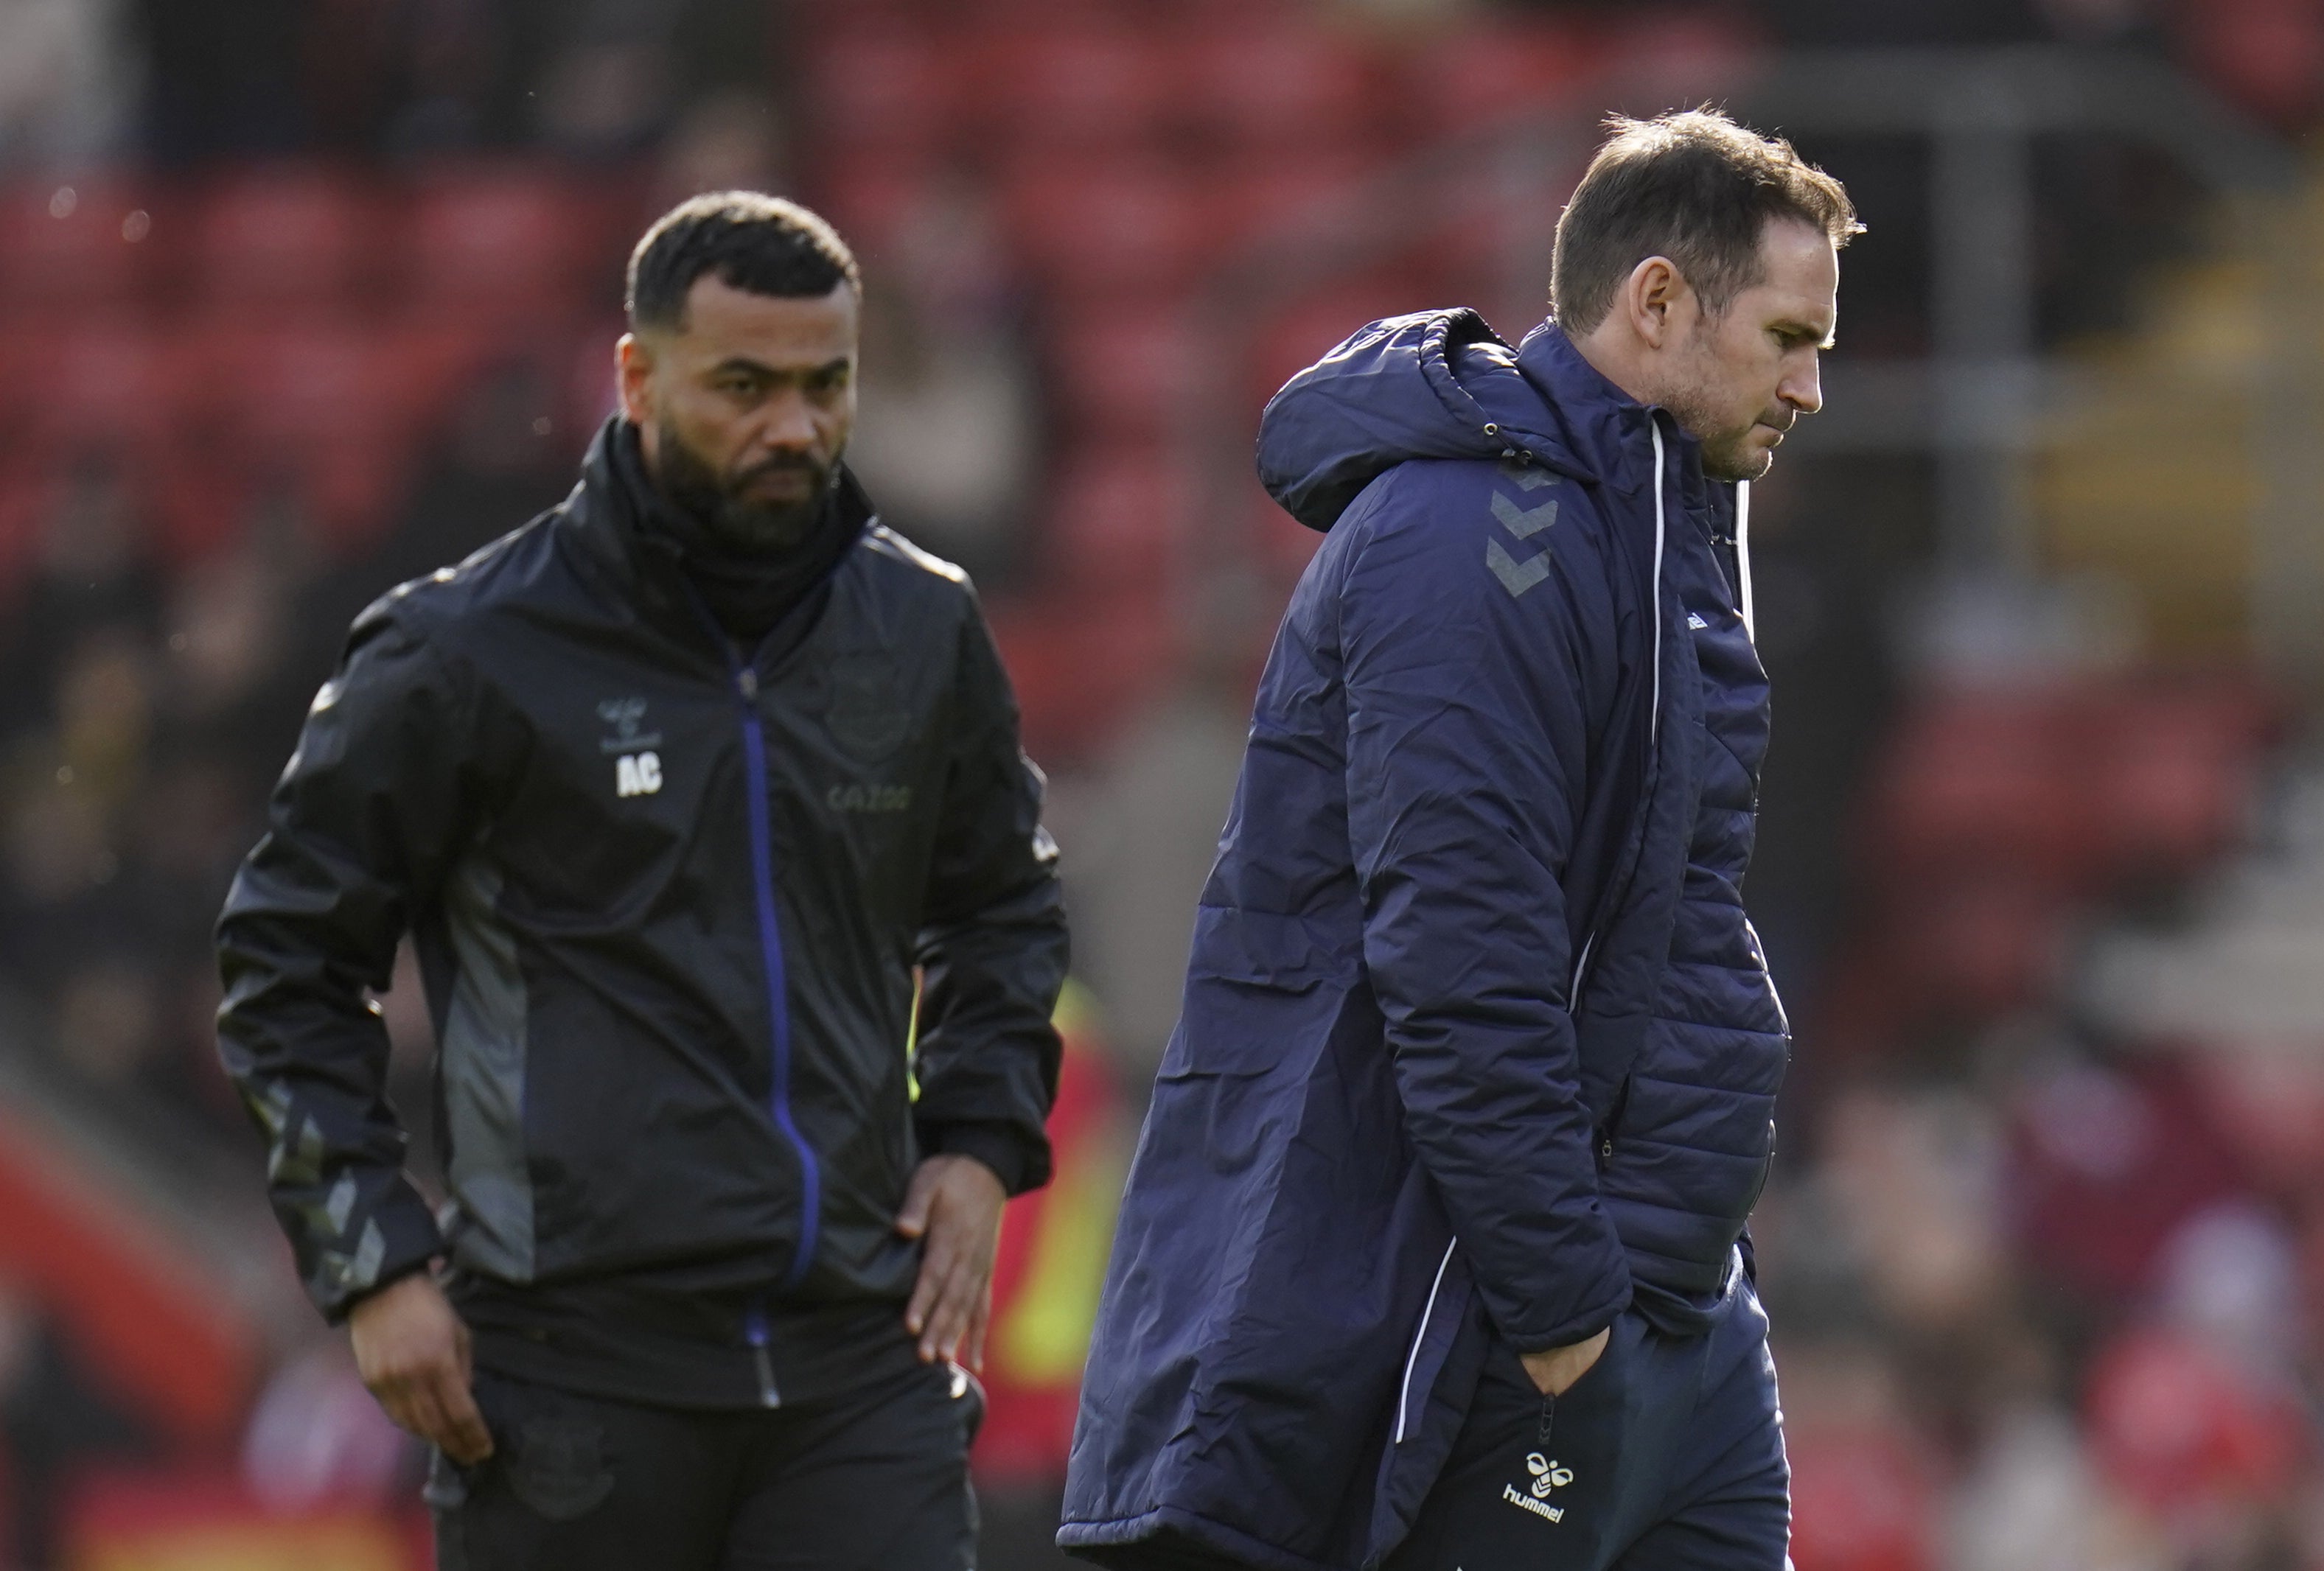 Everton manager Frank Lampard expects a hostile Tottenham welcome for him and assistant coach Ashley Cole